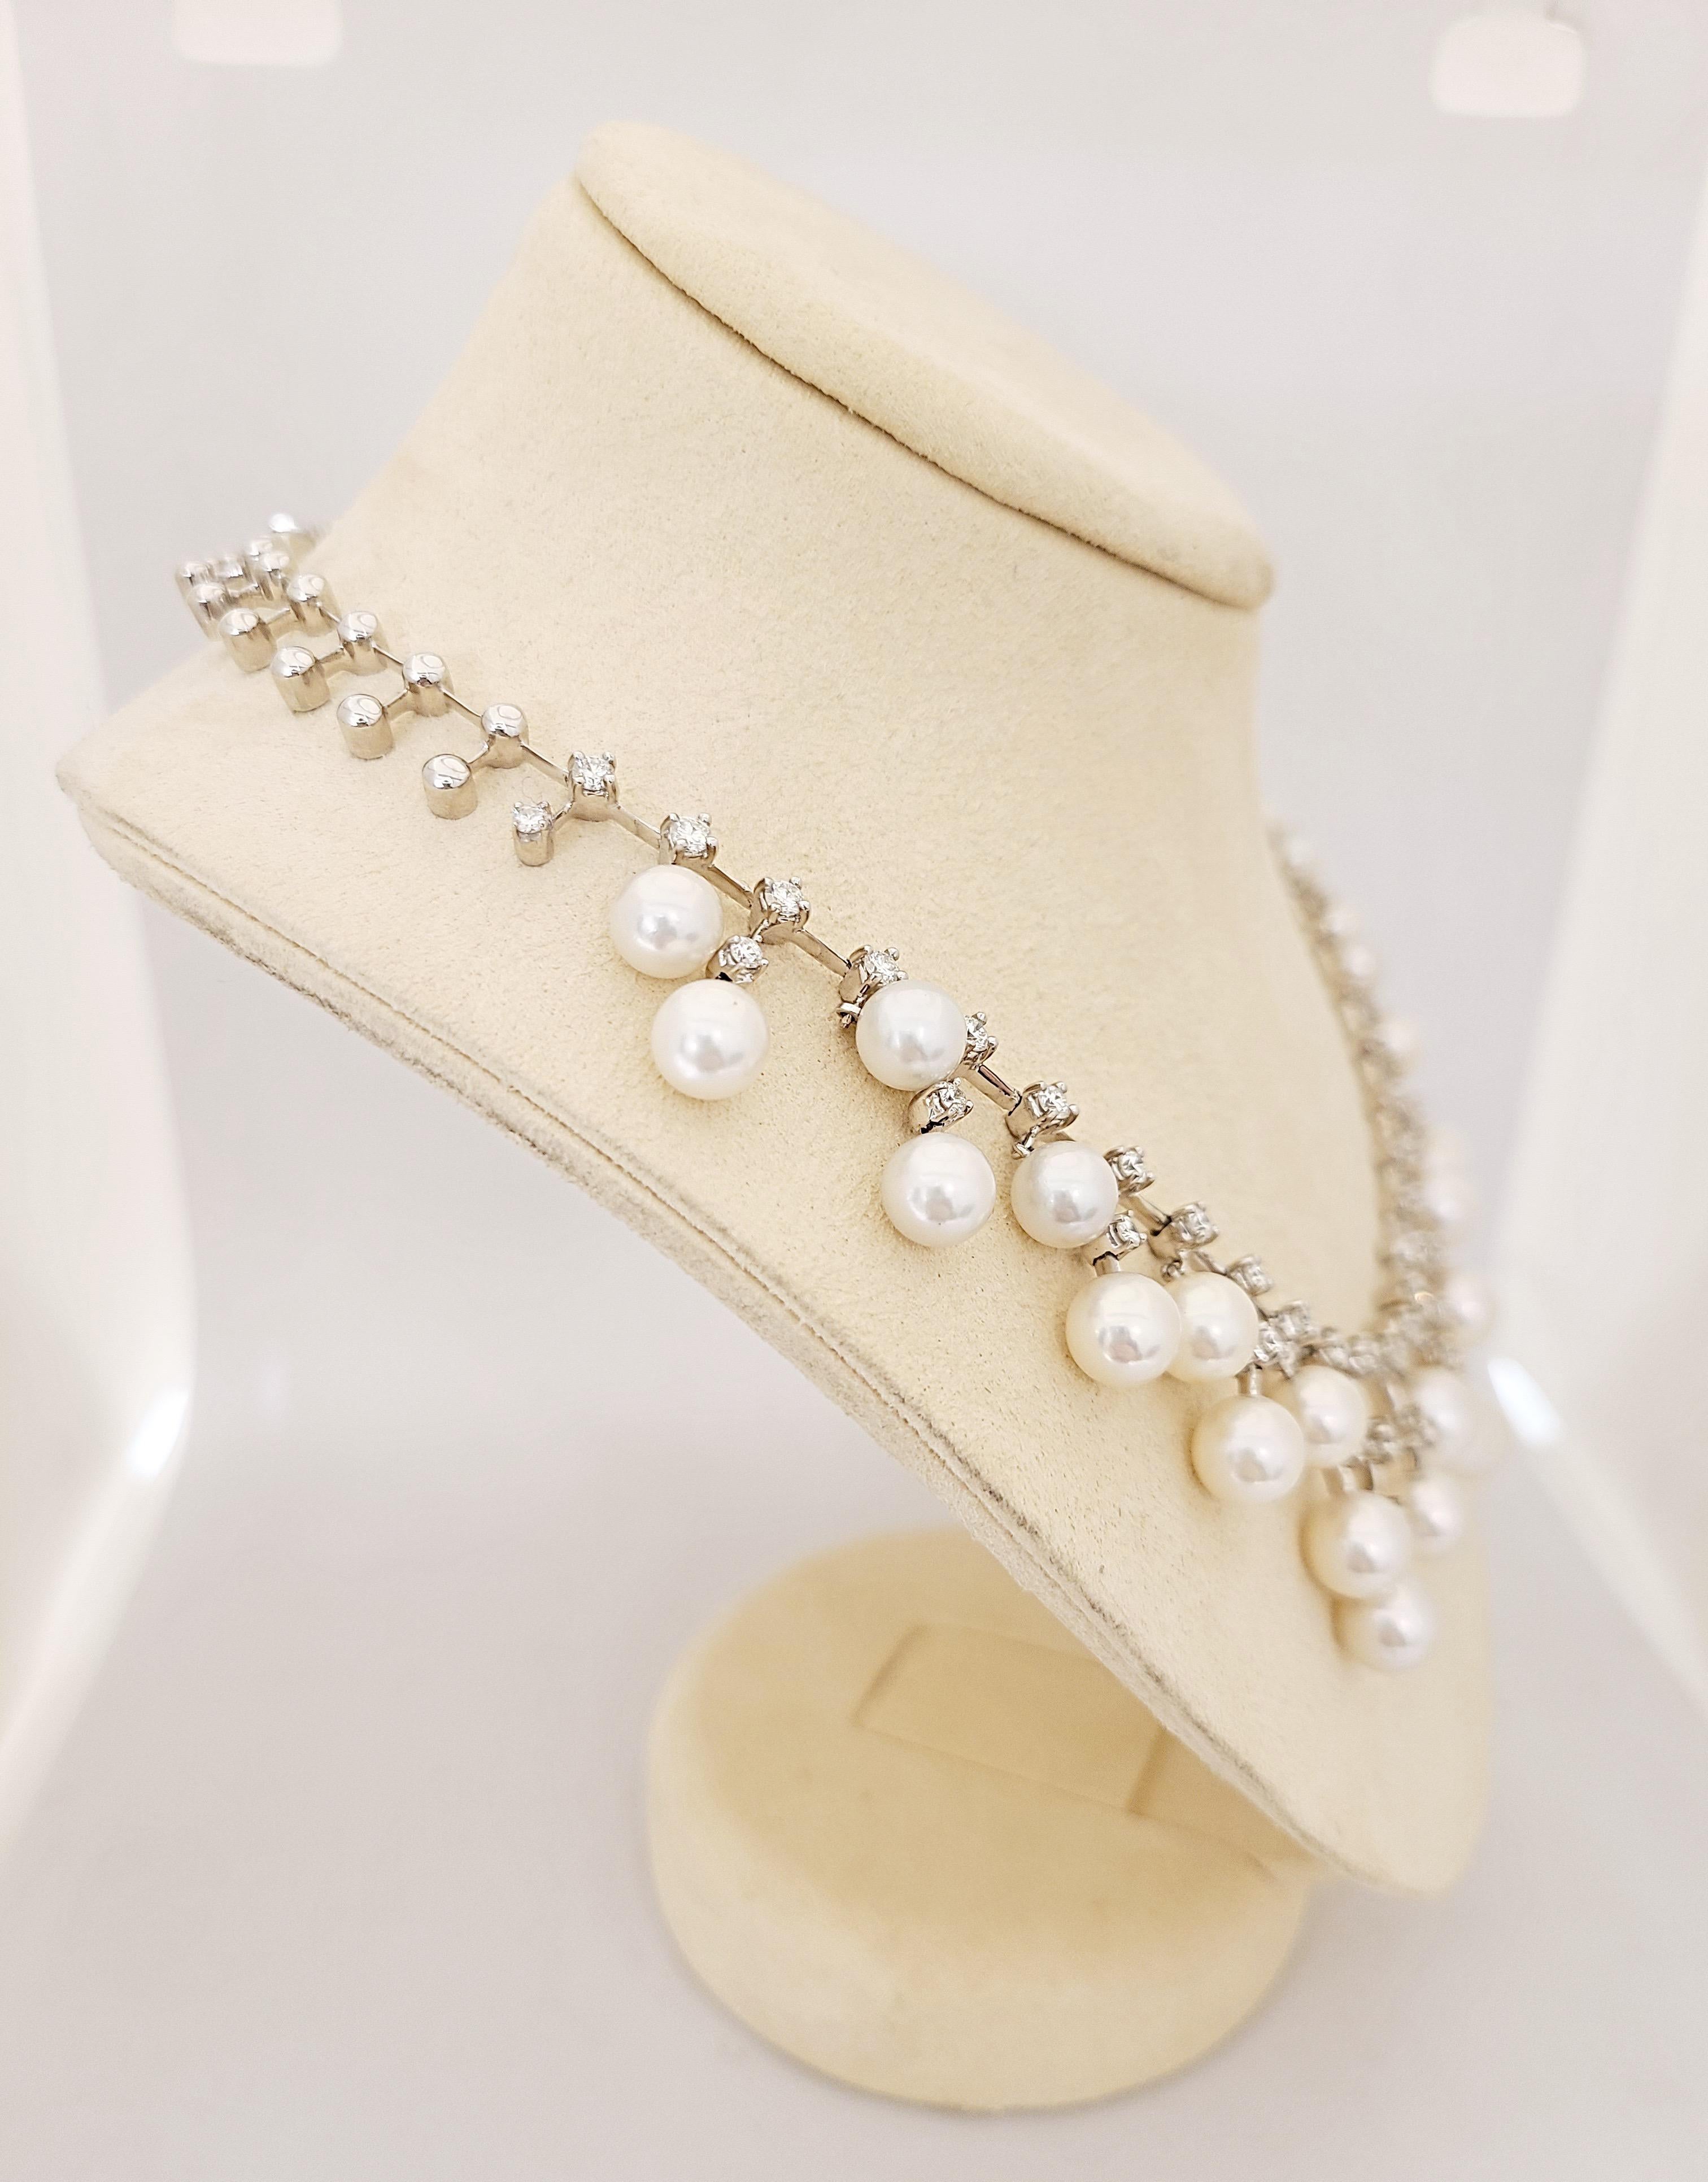 Round Cut Stephan Hafner 18 Karat White Gold Necklace with 4.04 Carat Diamonds and Pearls For Sale